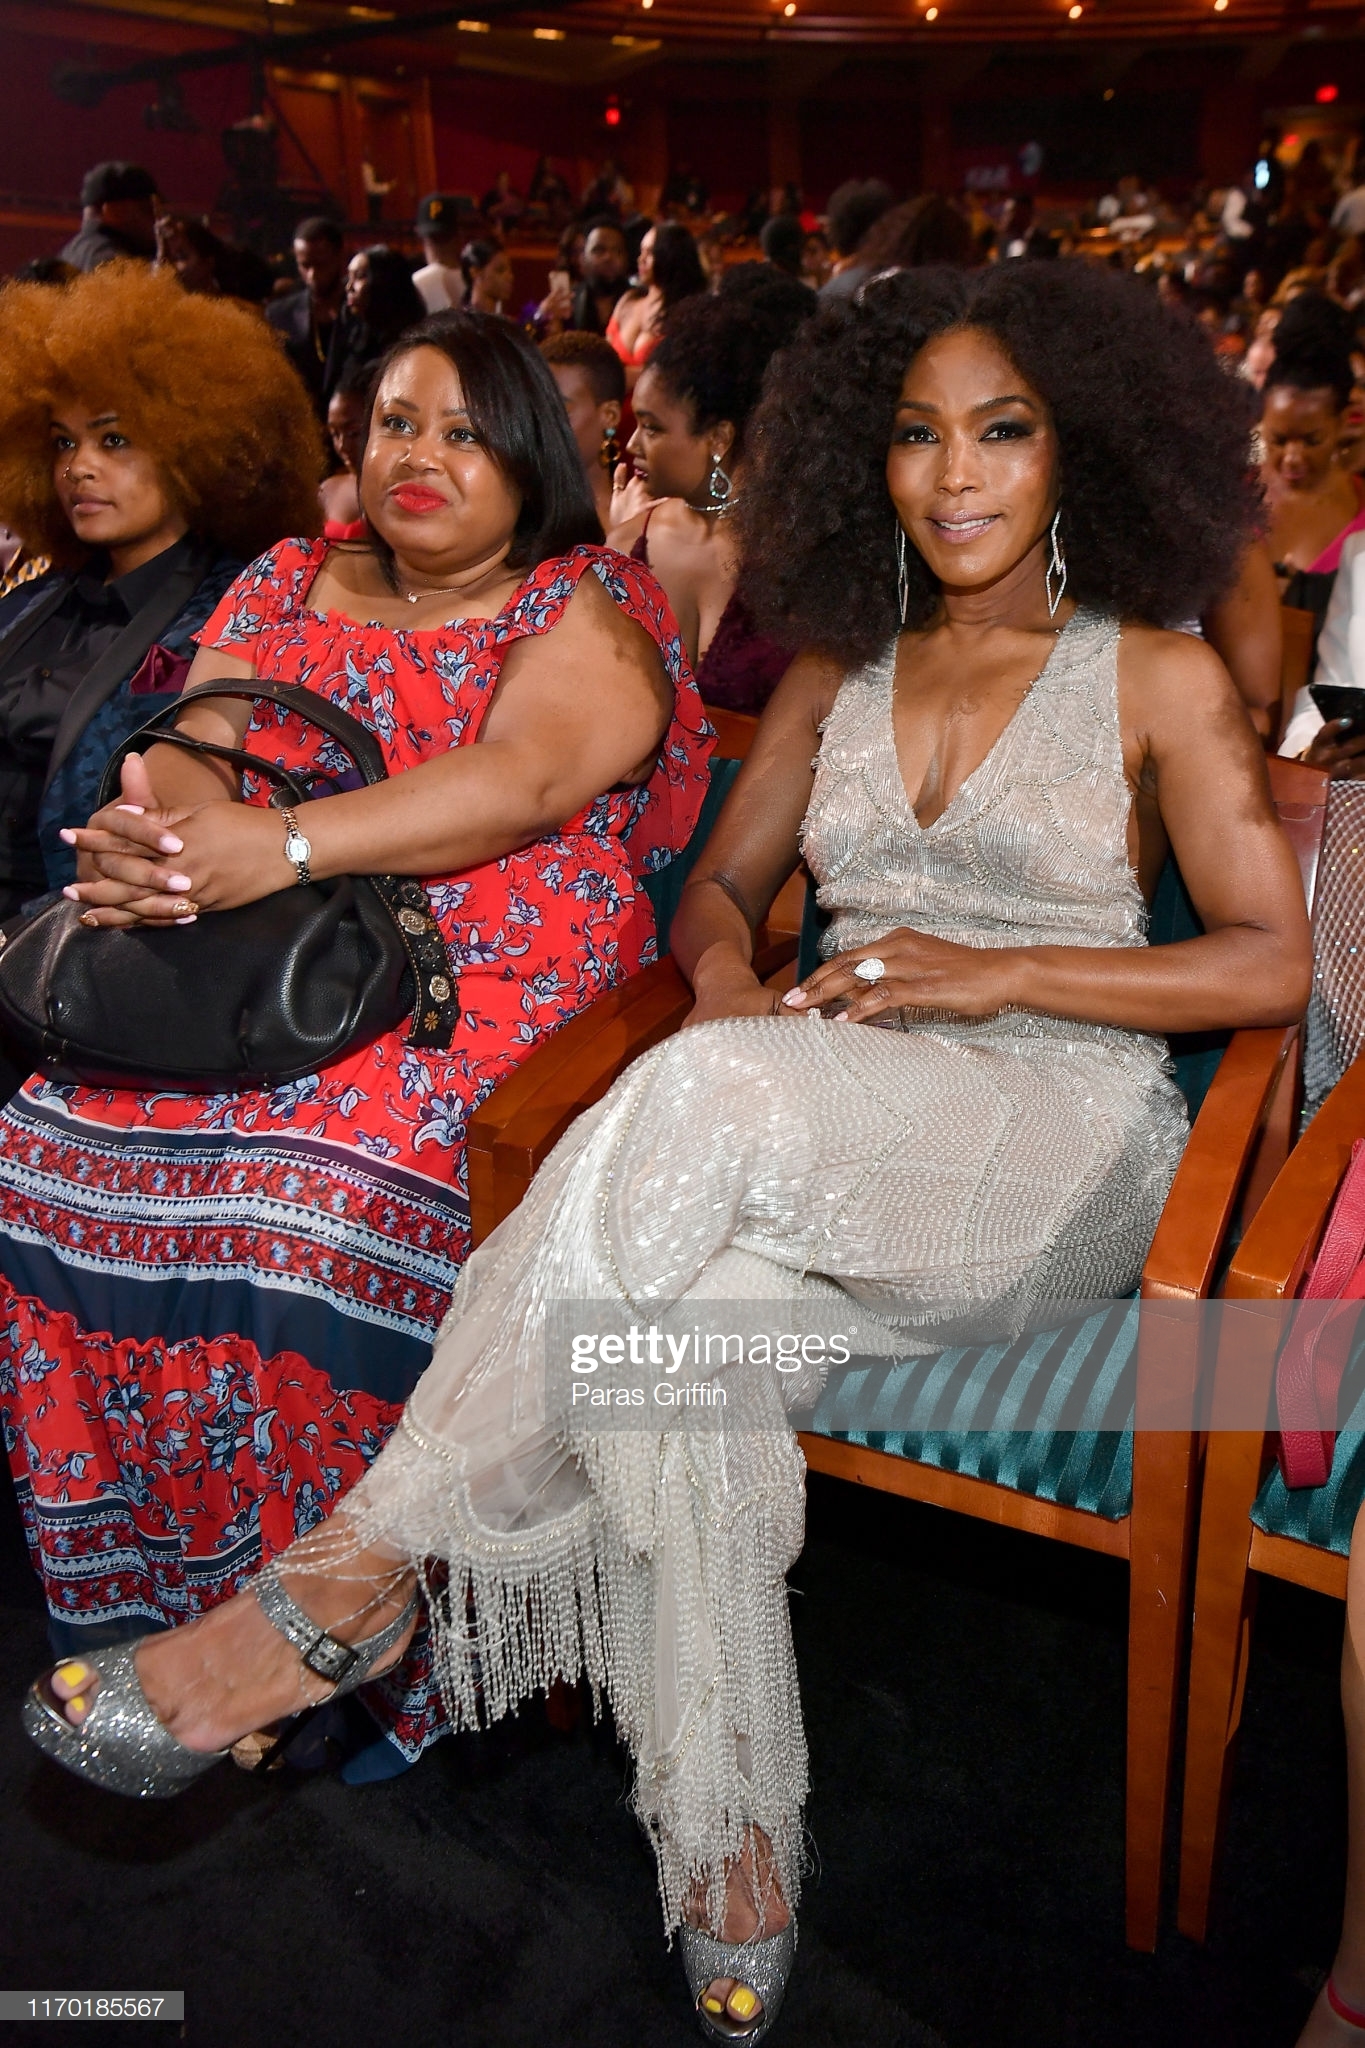 People who liked Angela Bassett's feet, also liked.